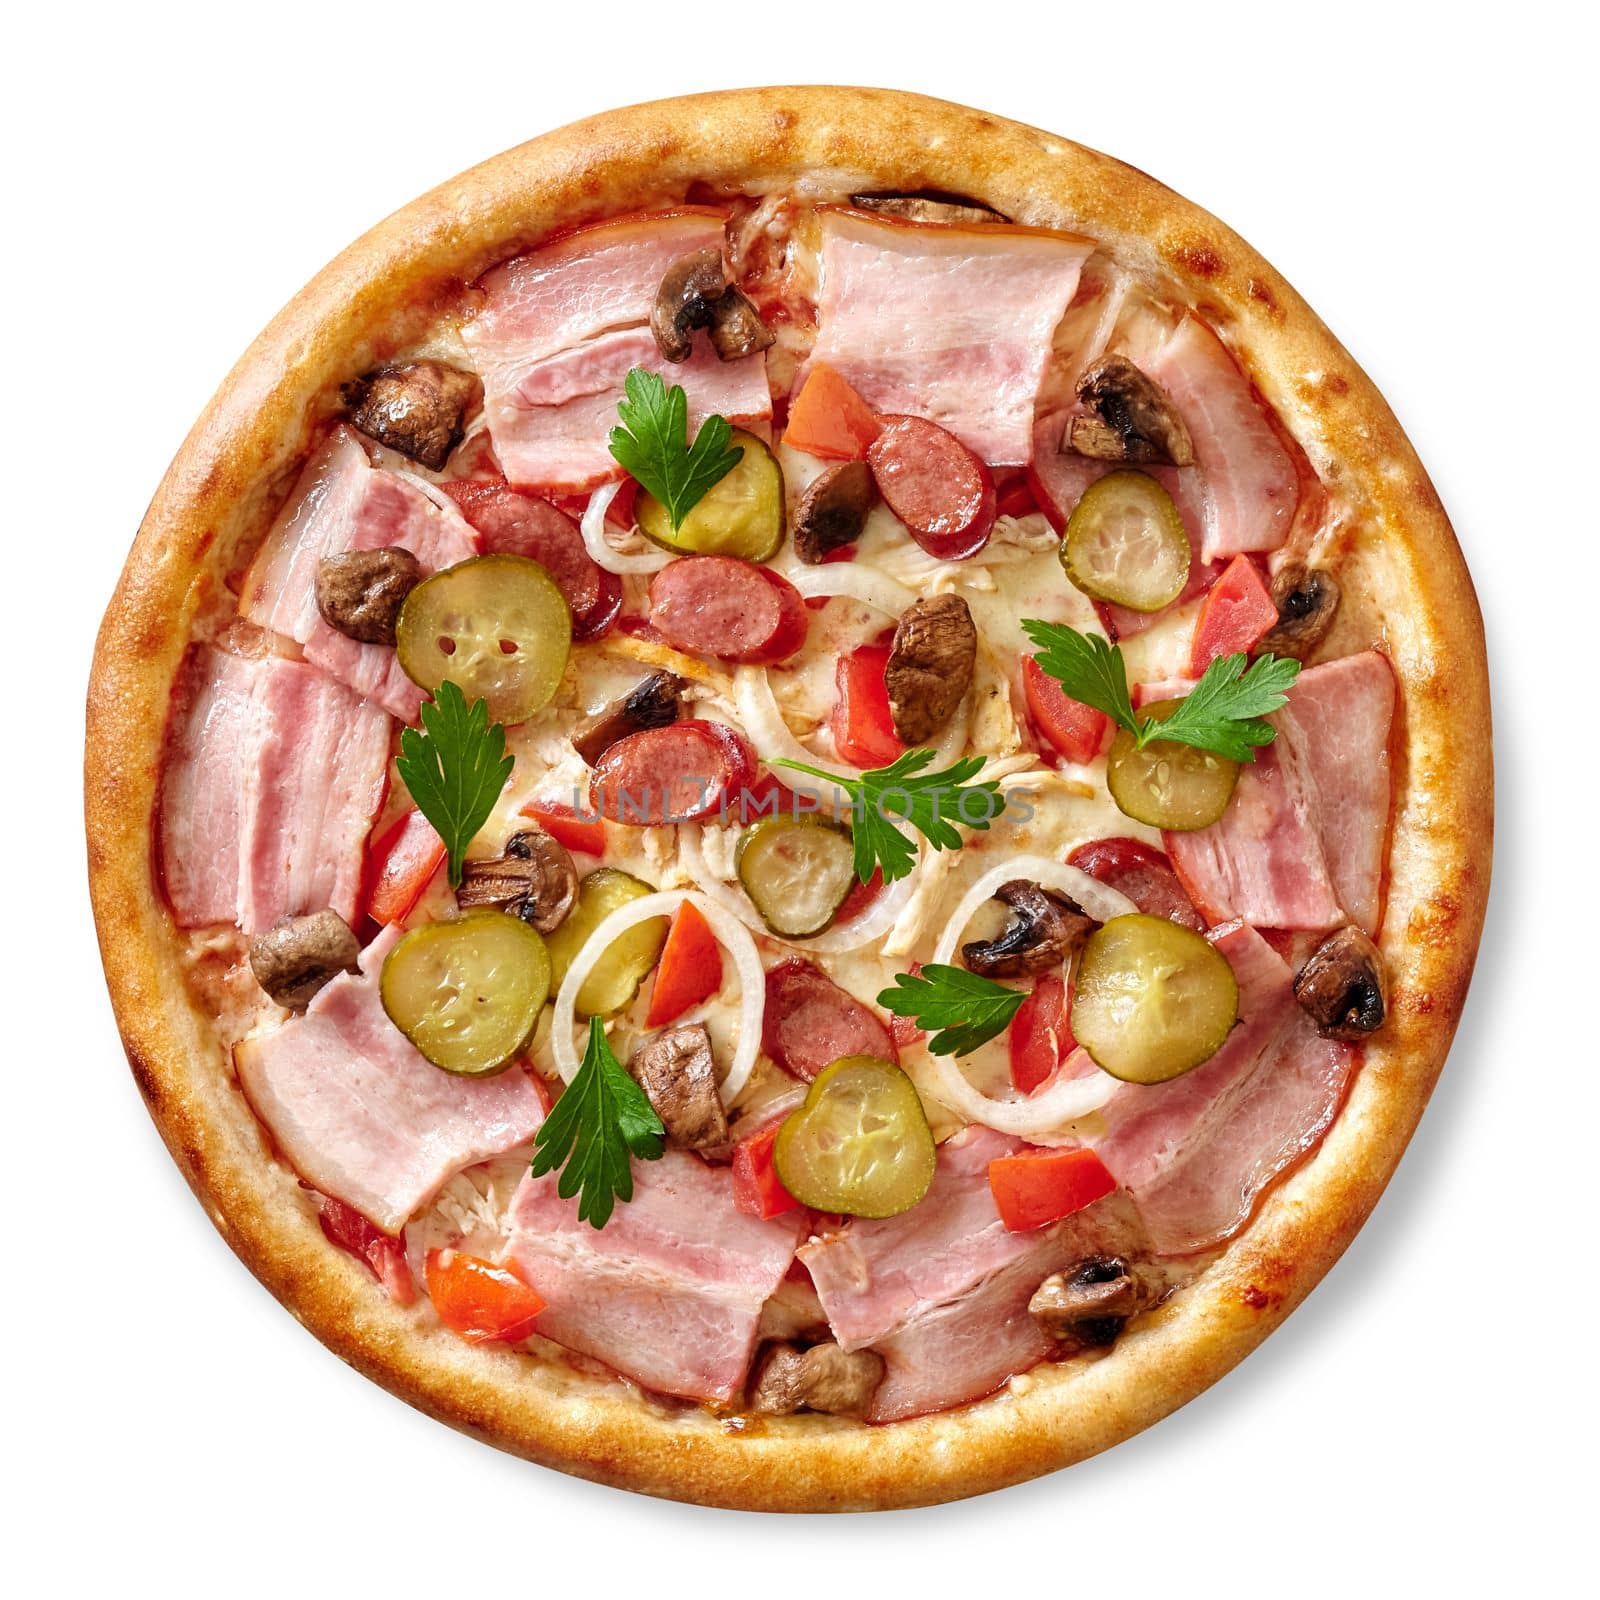 Hearty pizza in rustic style with chicken, hunting sausages and bacon in combination with pickles, mushrooms, onions and greens based on cheese sauce. Top view isolated on white background